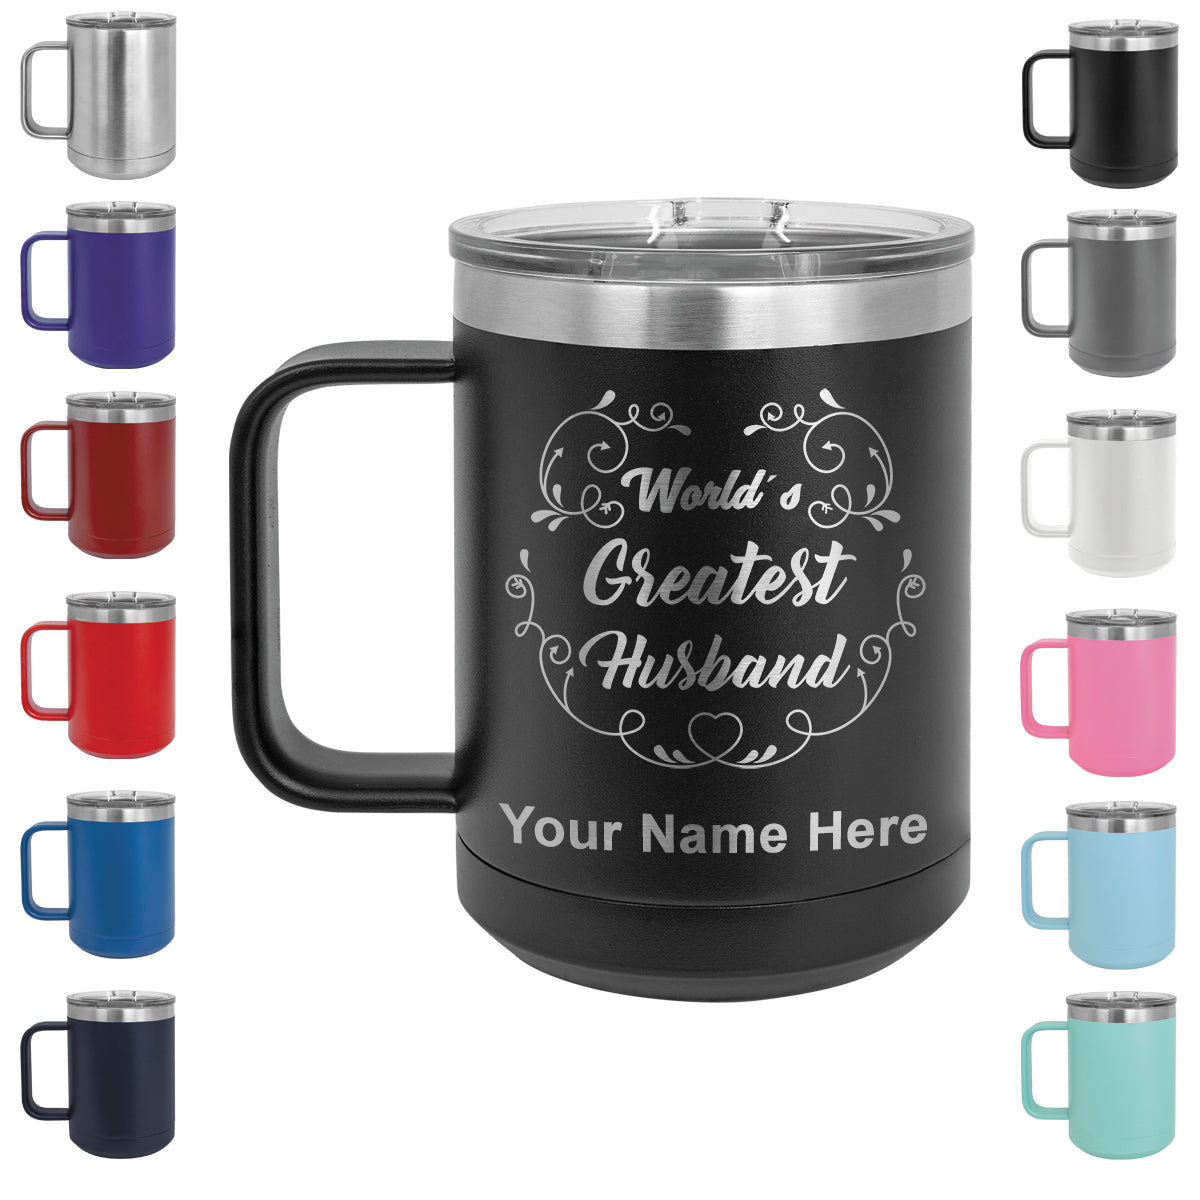 15oz Vacuum Insulated Coffee Mug, World's Greatest Husband, Personalized Engraving Included